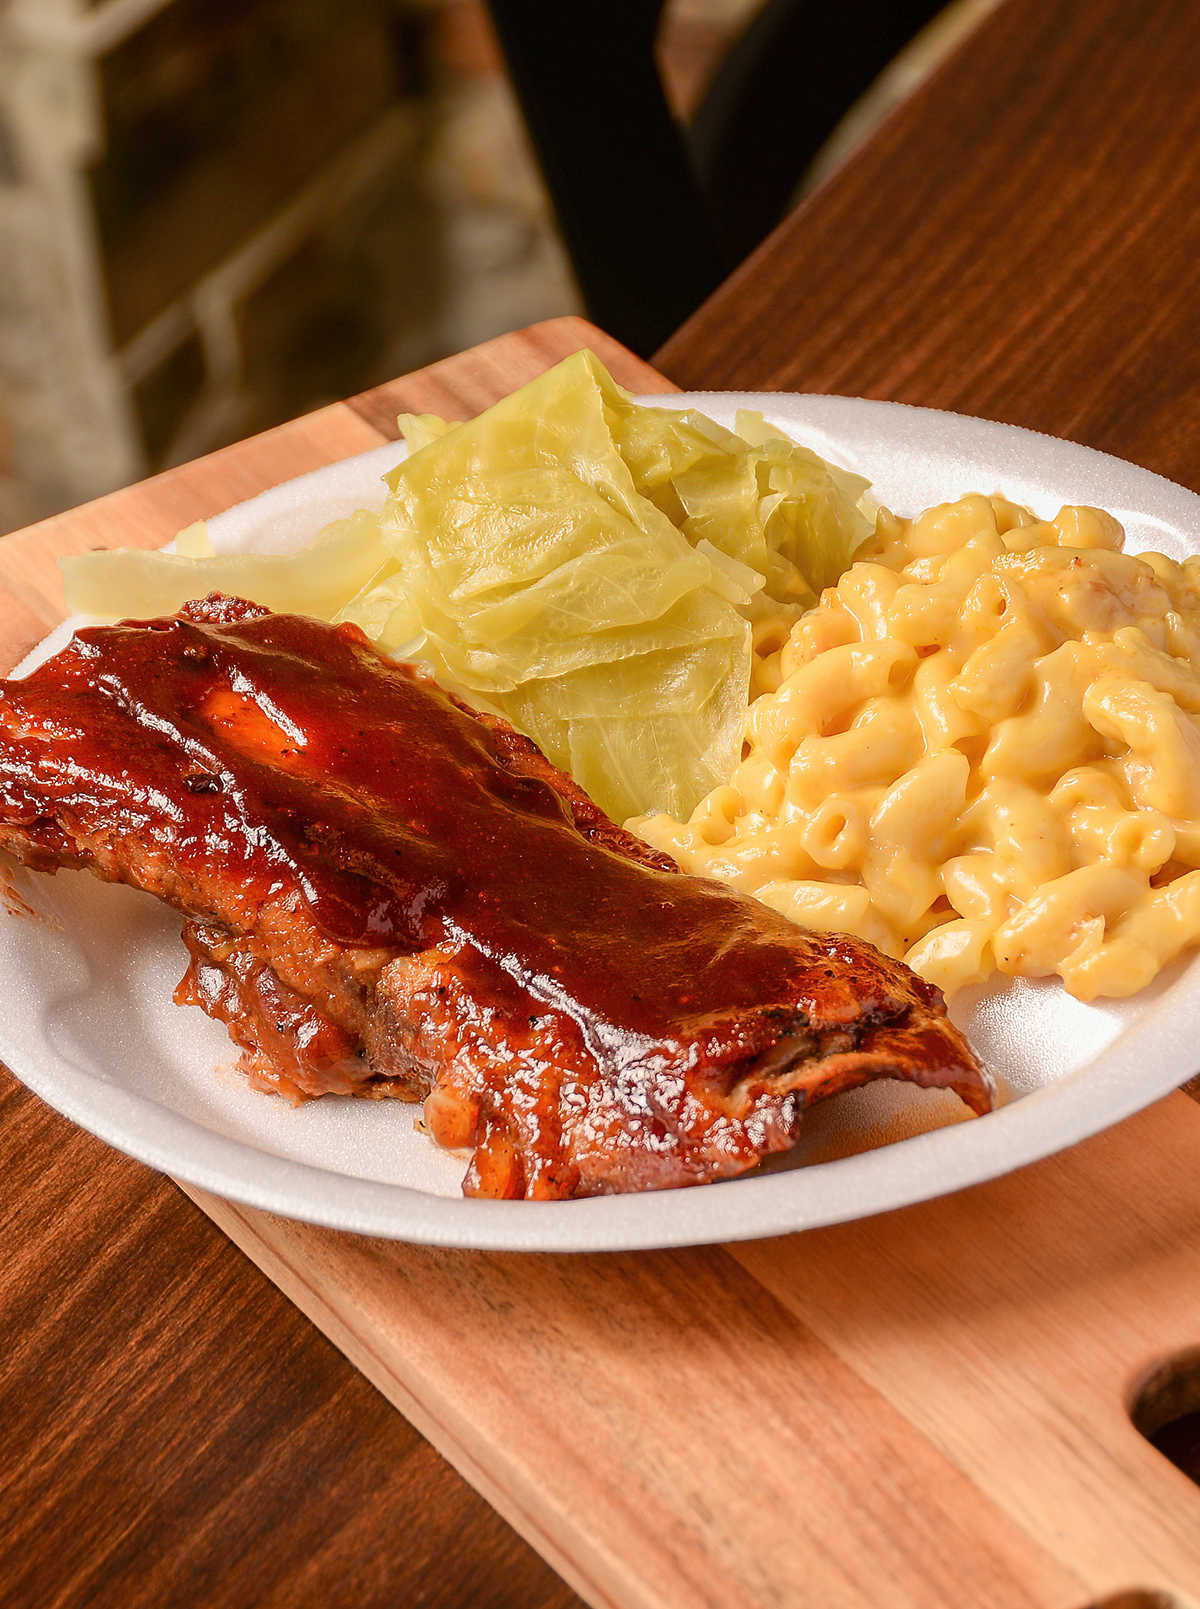 Ribs, Macaroni and Cheese on a plate